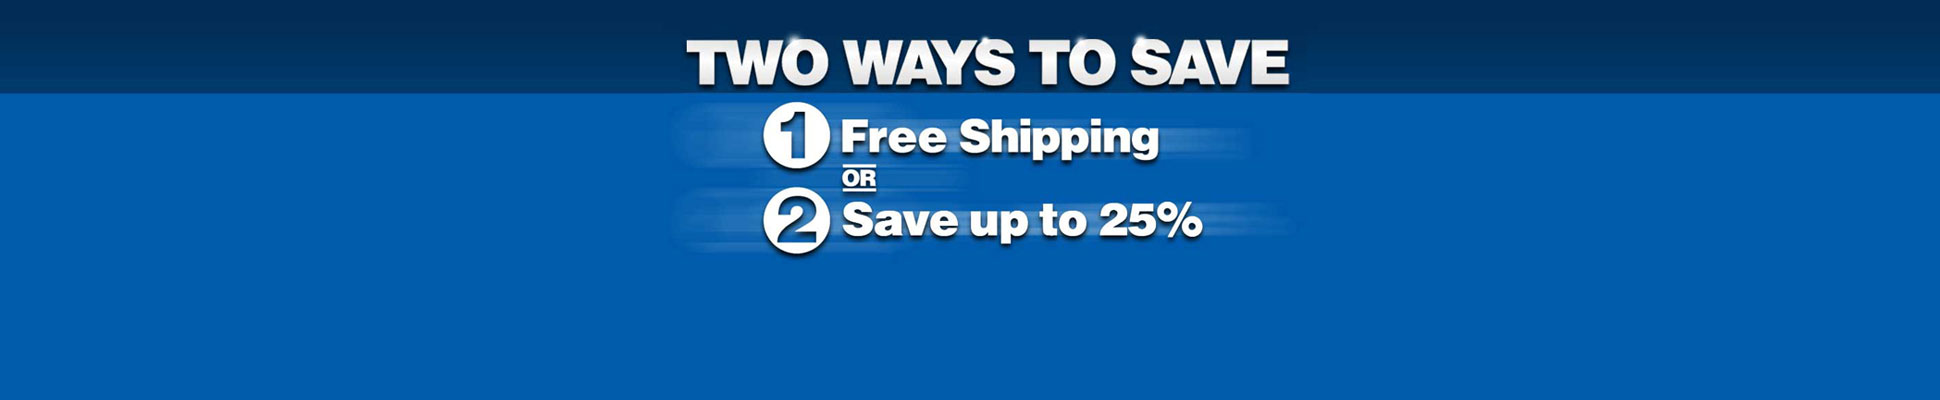 Free Shipping on AMSOIL